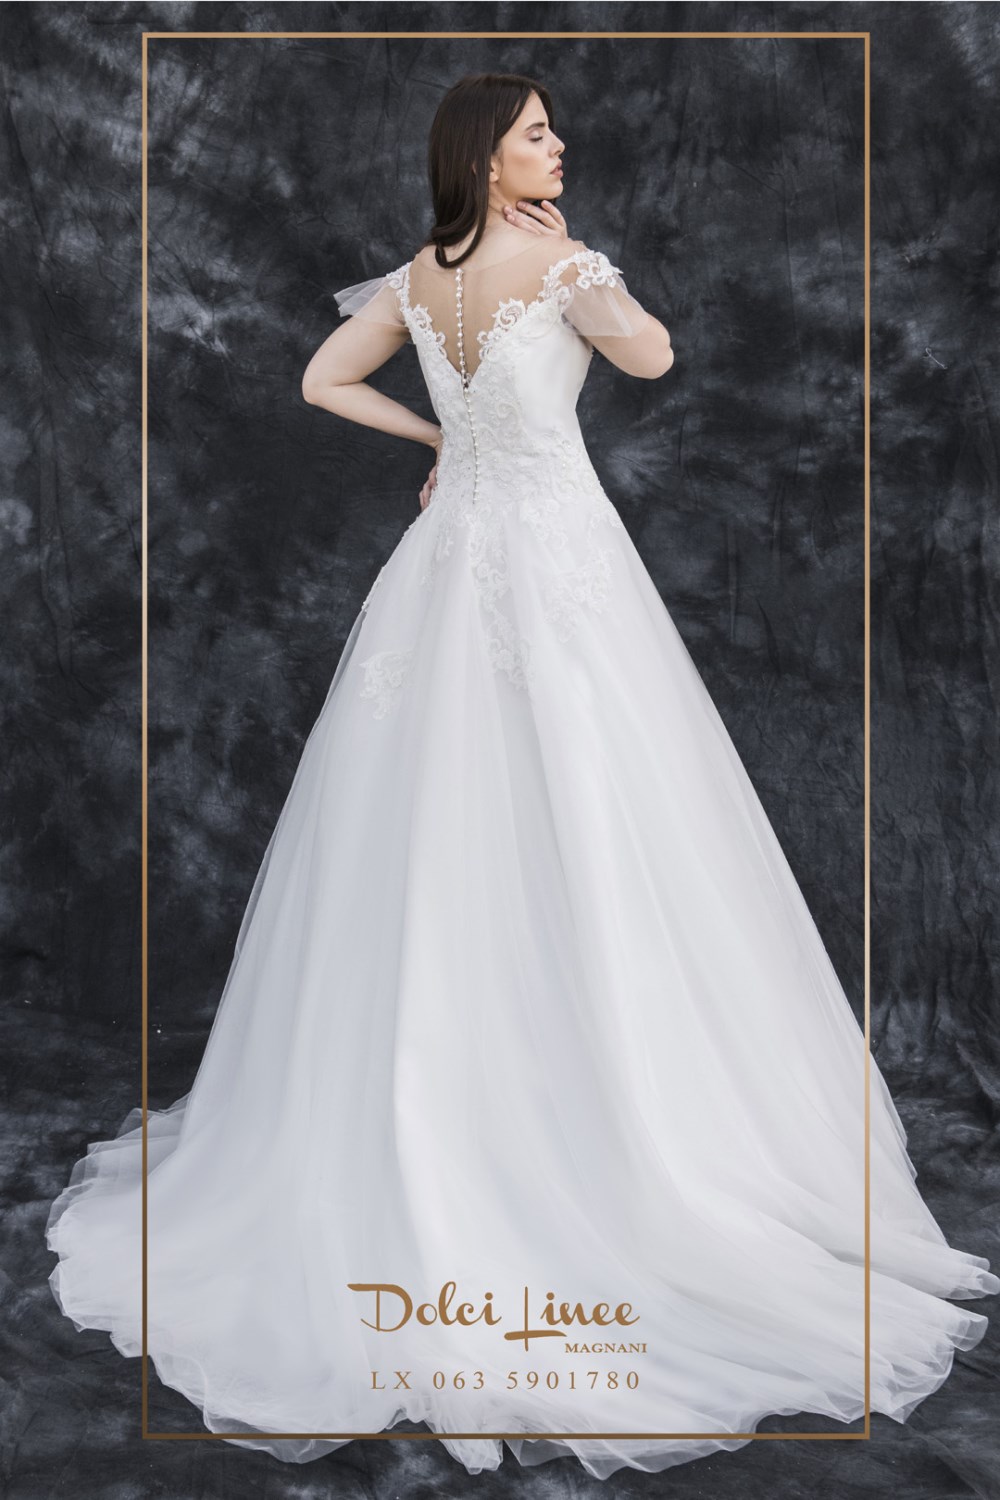 Wide dress in tulle and embroidered lace - LX 063 